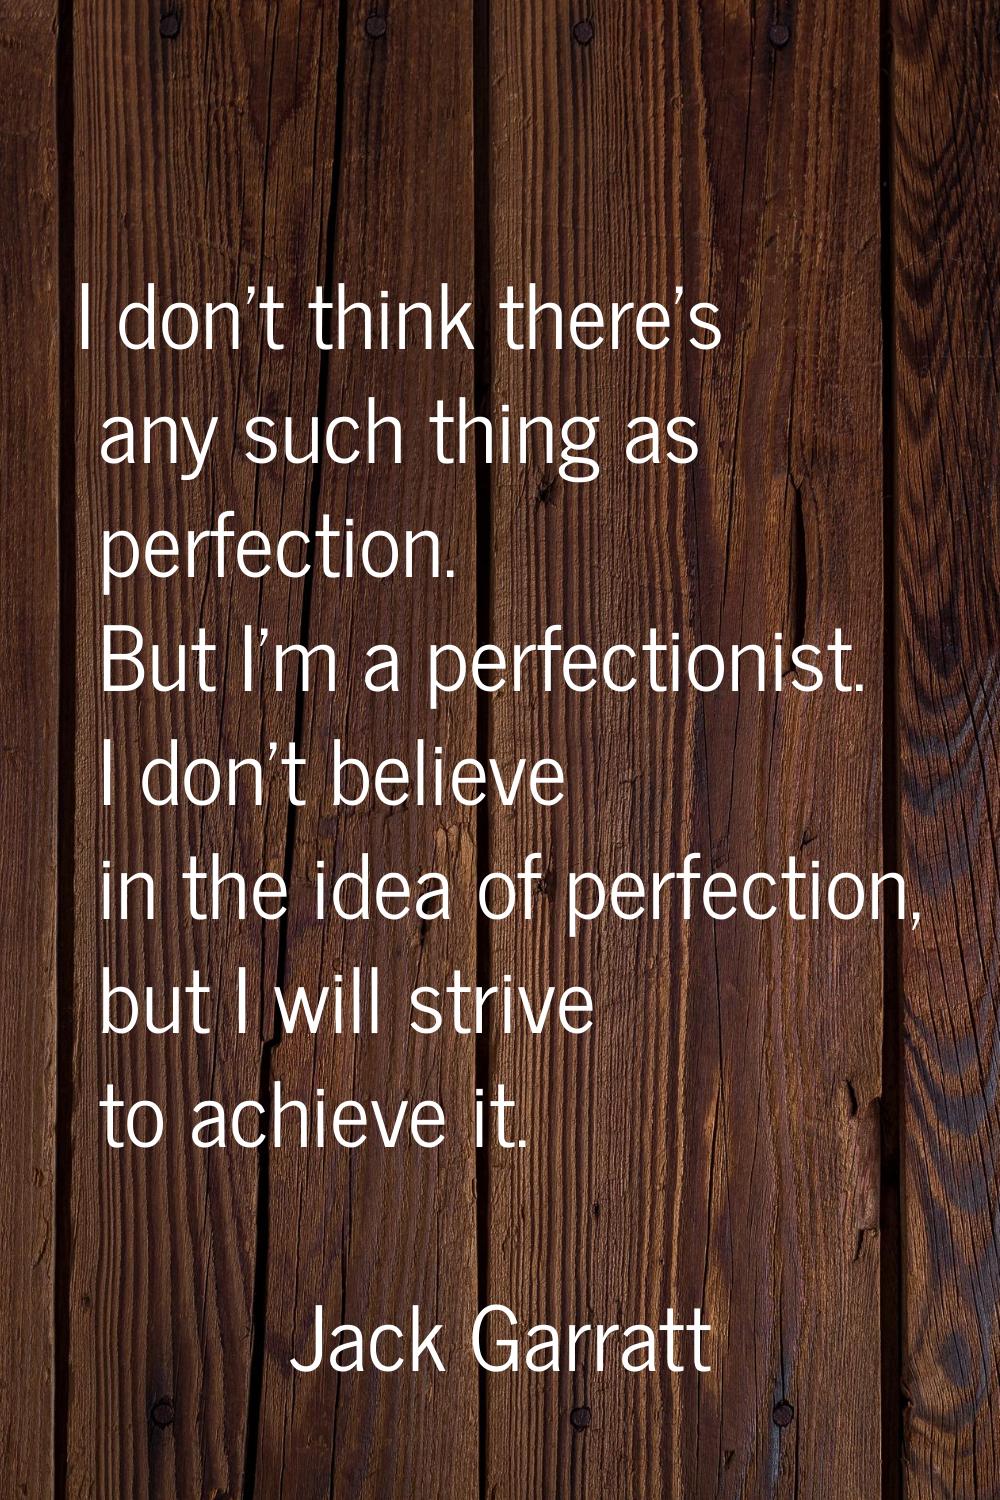 I don't think there's any such thing as perfection. But I'm a perfectionist. I don't believe in the